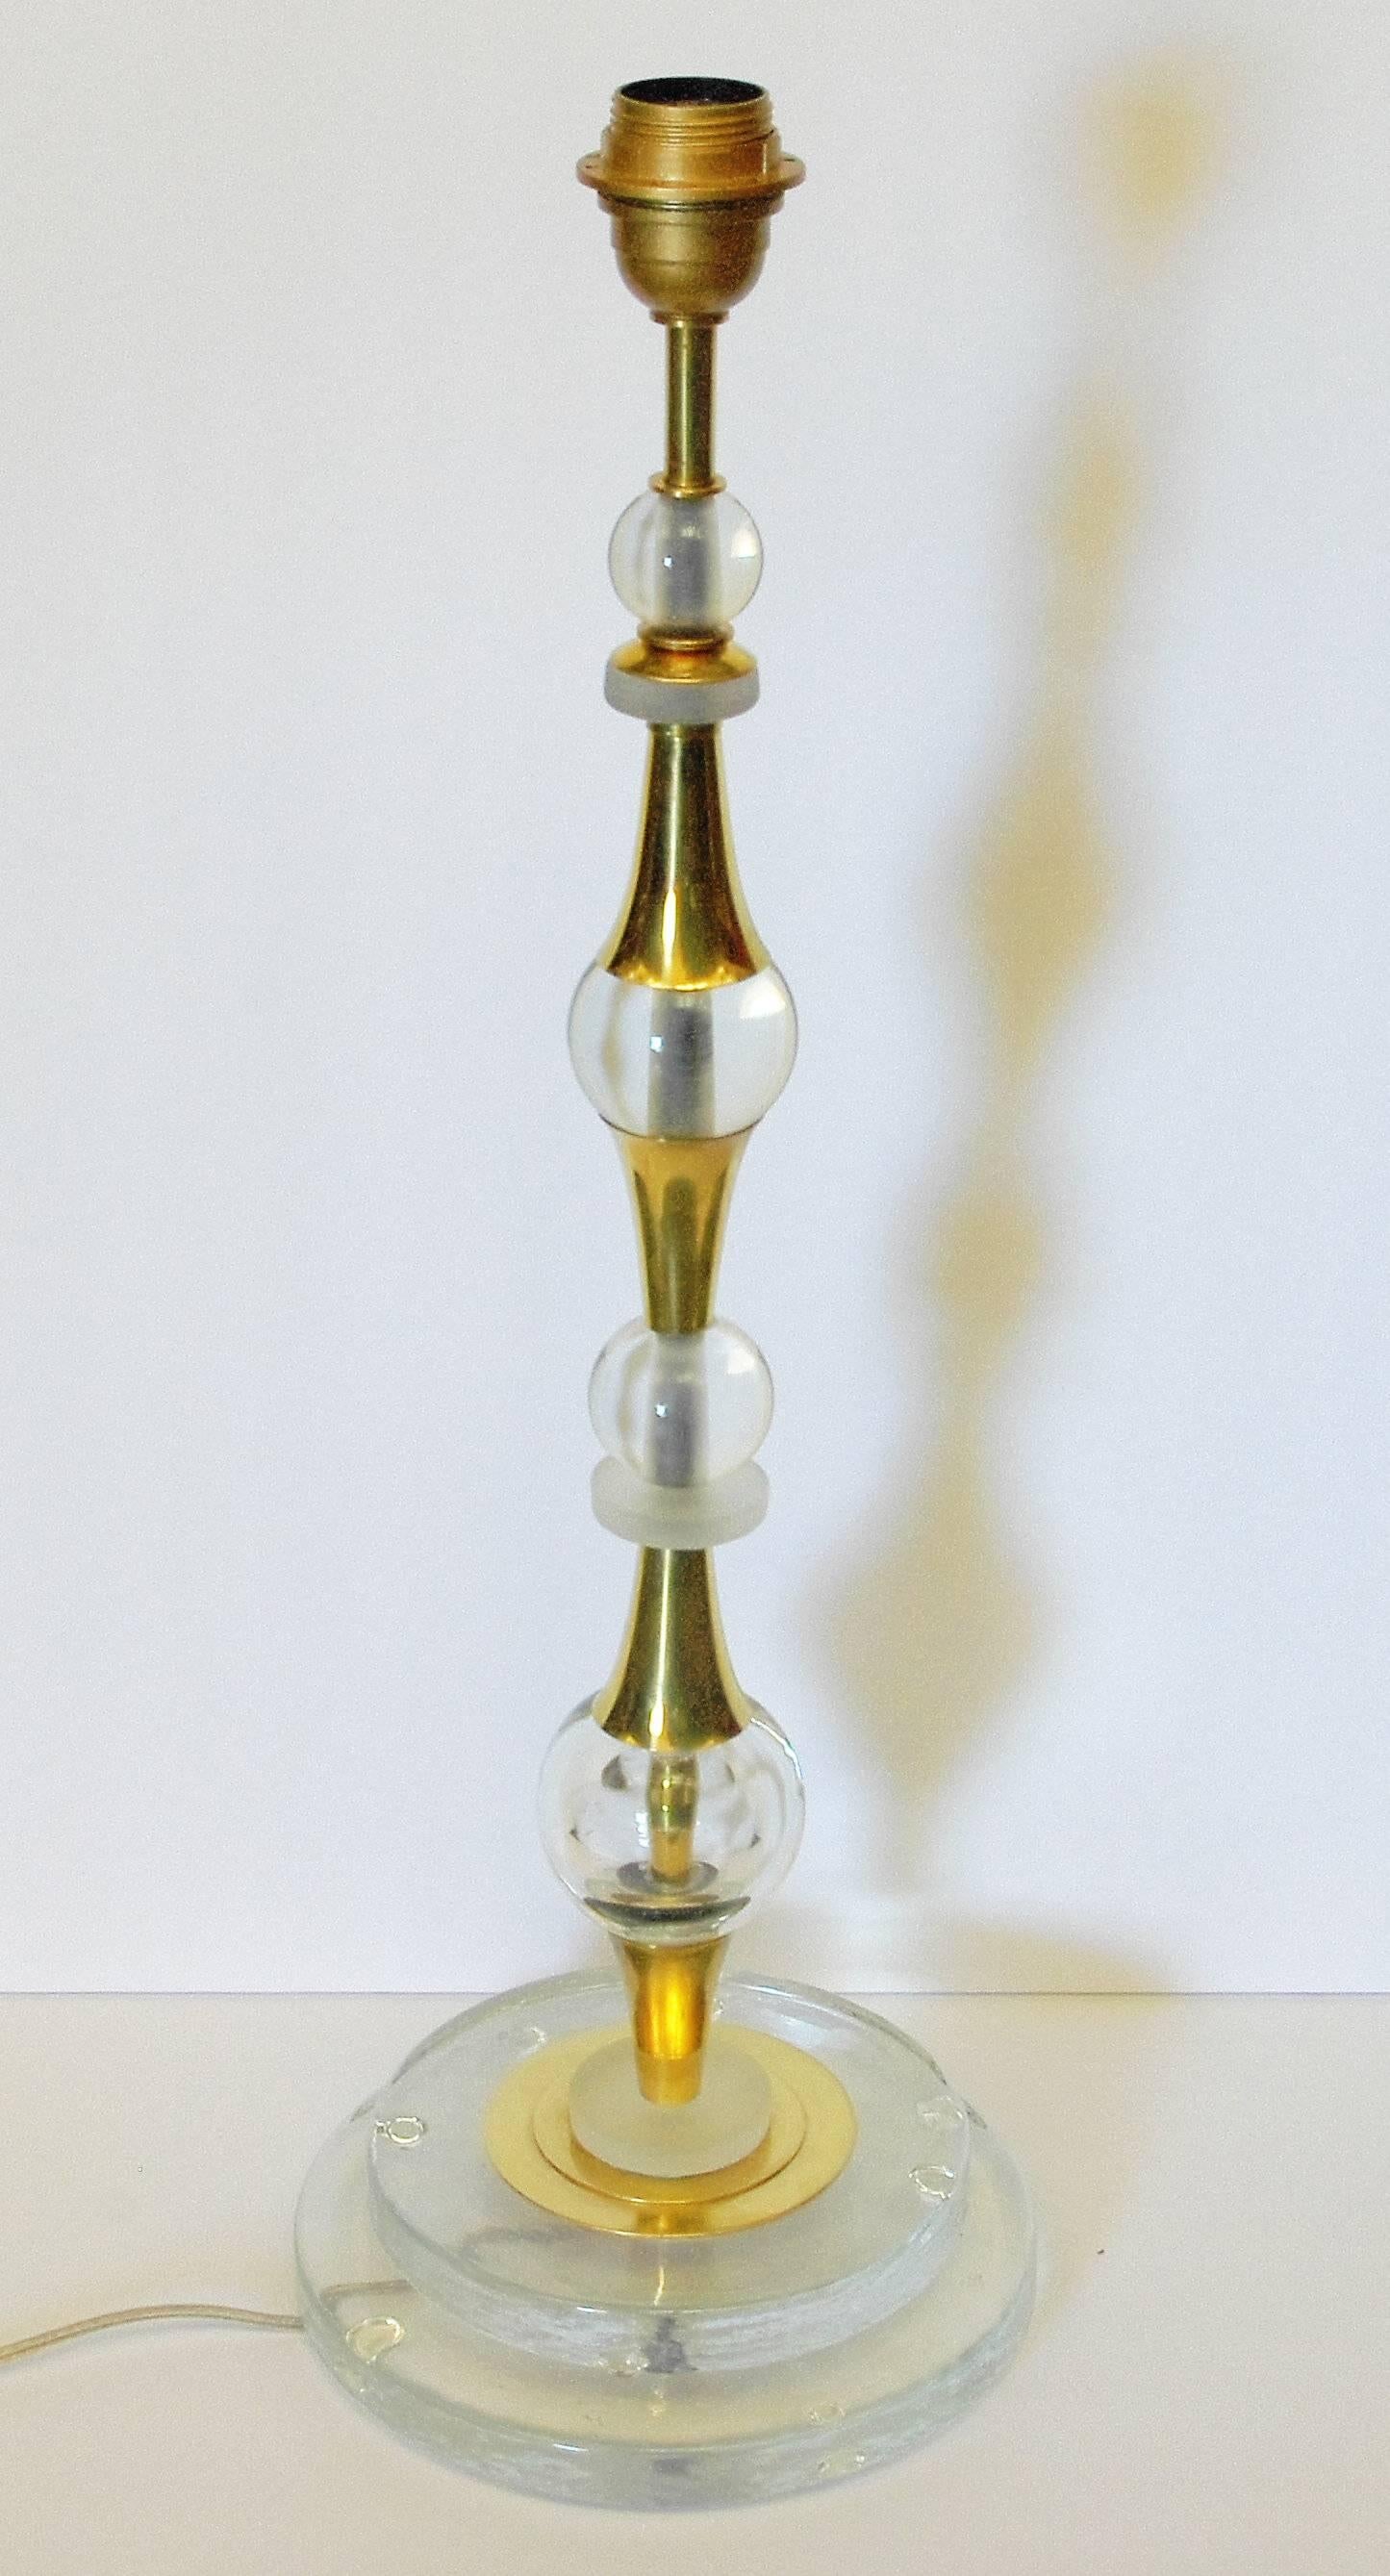 Vintage Italian Murano glass table lamp with transparent Murano glasses mounted on polished brass frame / In the style of Ettore Sottsass / Made in Italy circa 1980’s
1 light / E26 or E27 type / max 60W  
Height: 25.5 inches / Diameter: 8.5 inches
1